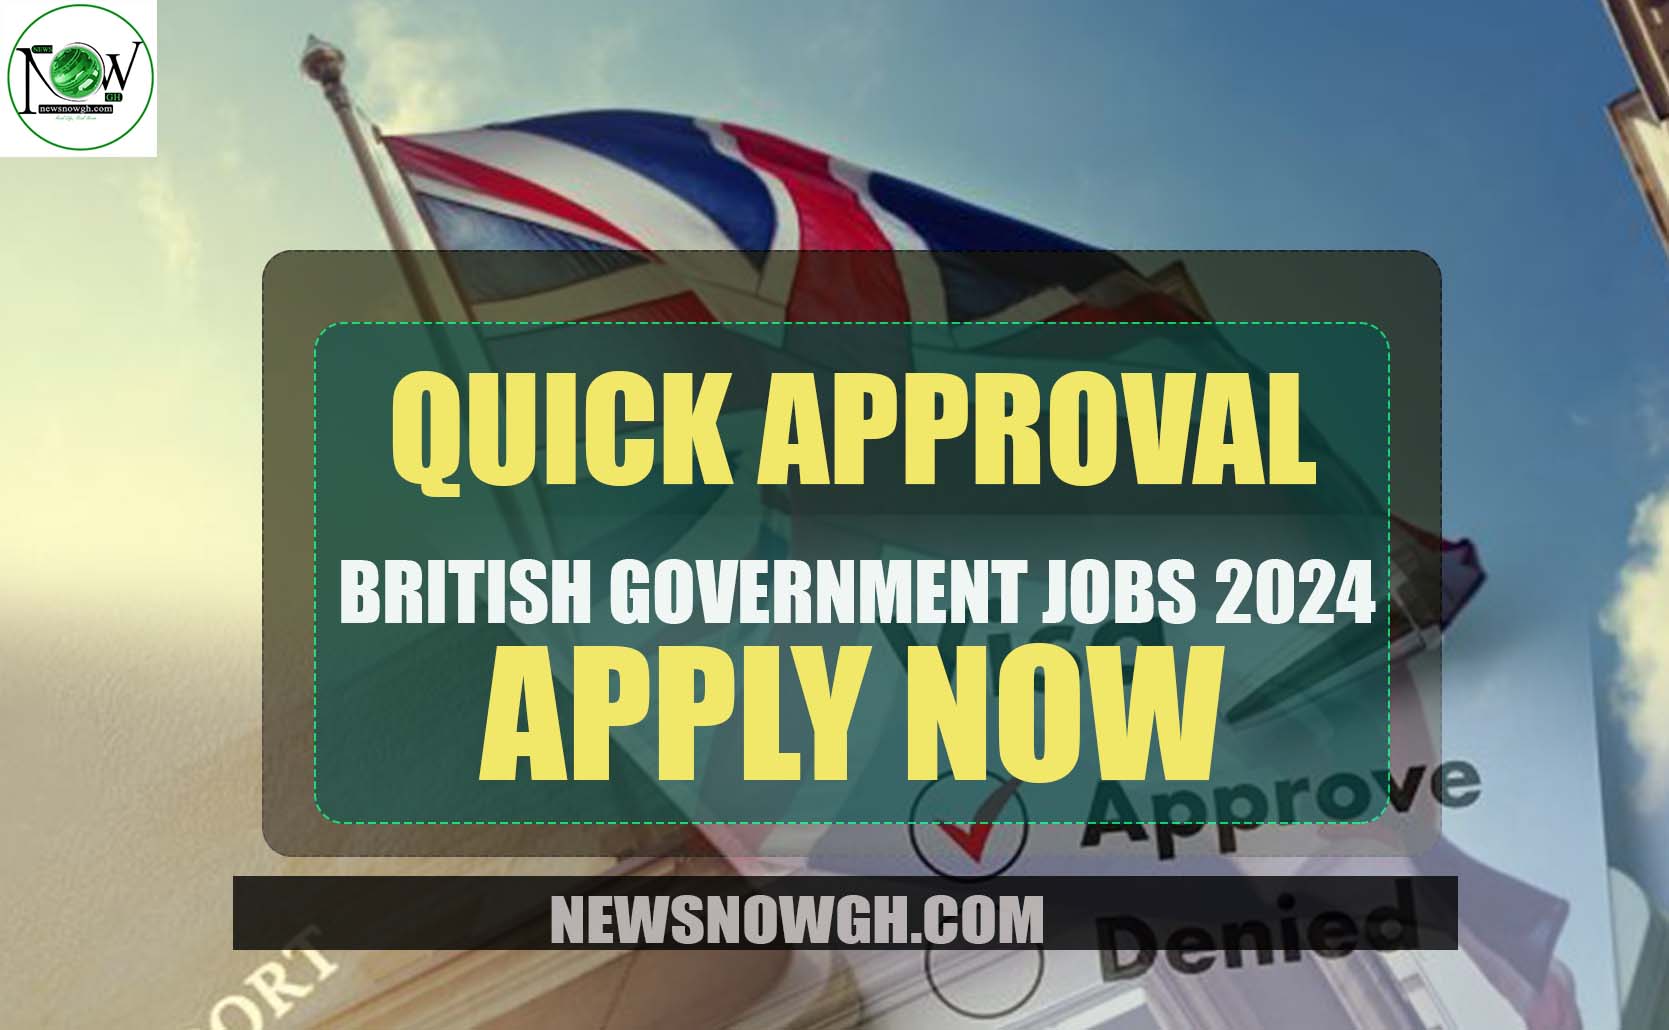 British Government Jobs 2024 Quick Approval Apply Now